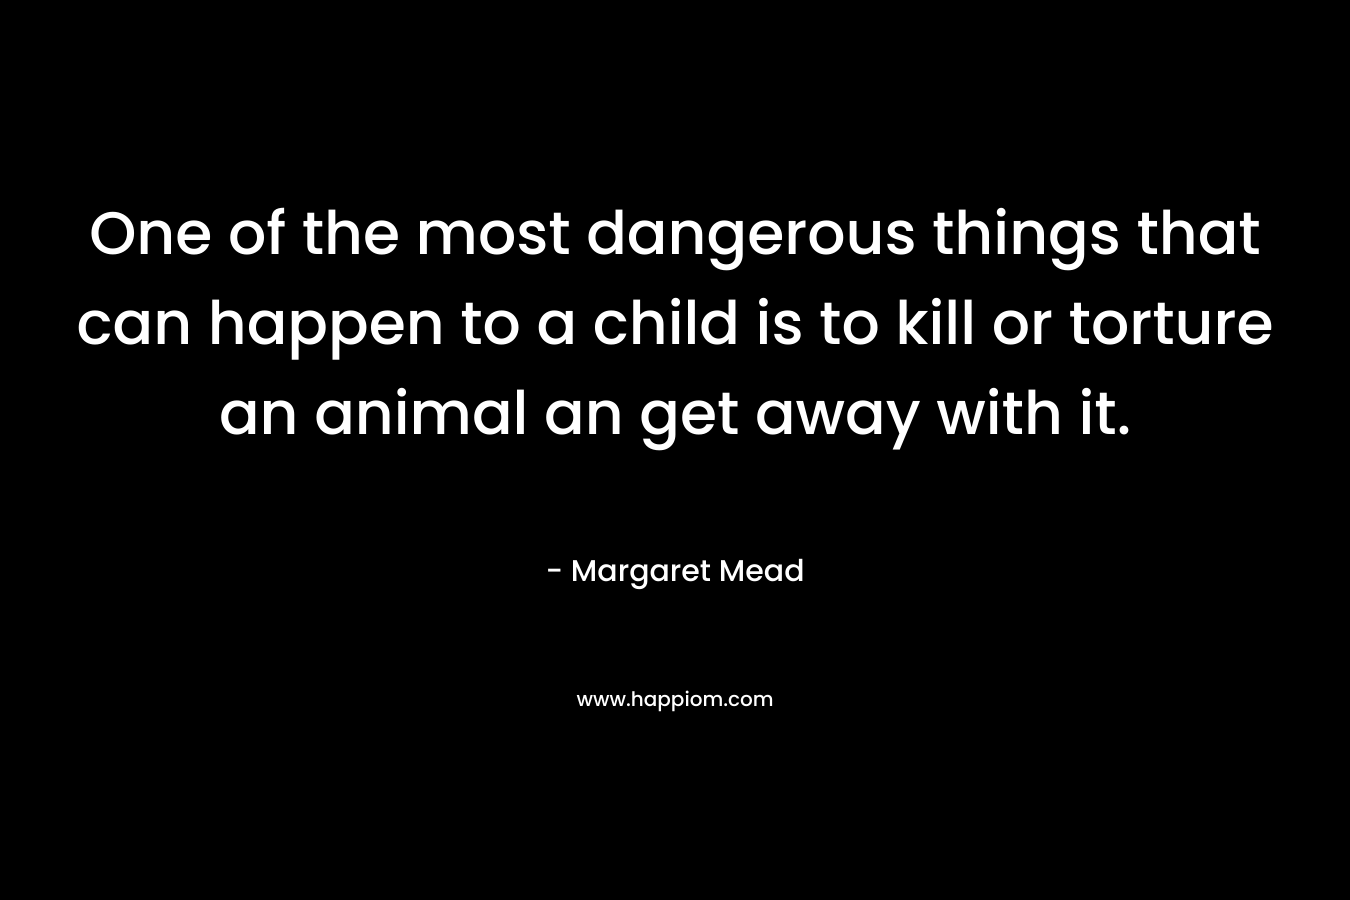 One of the most dangerous things that can happen to a child is to kill or torture an animal an get away with it. – Margaret Mead